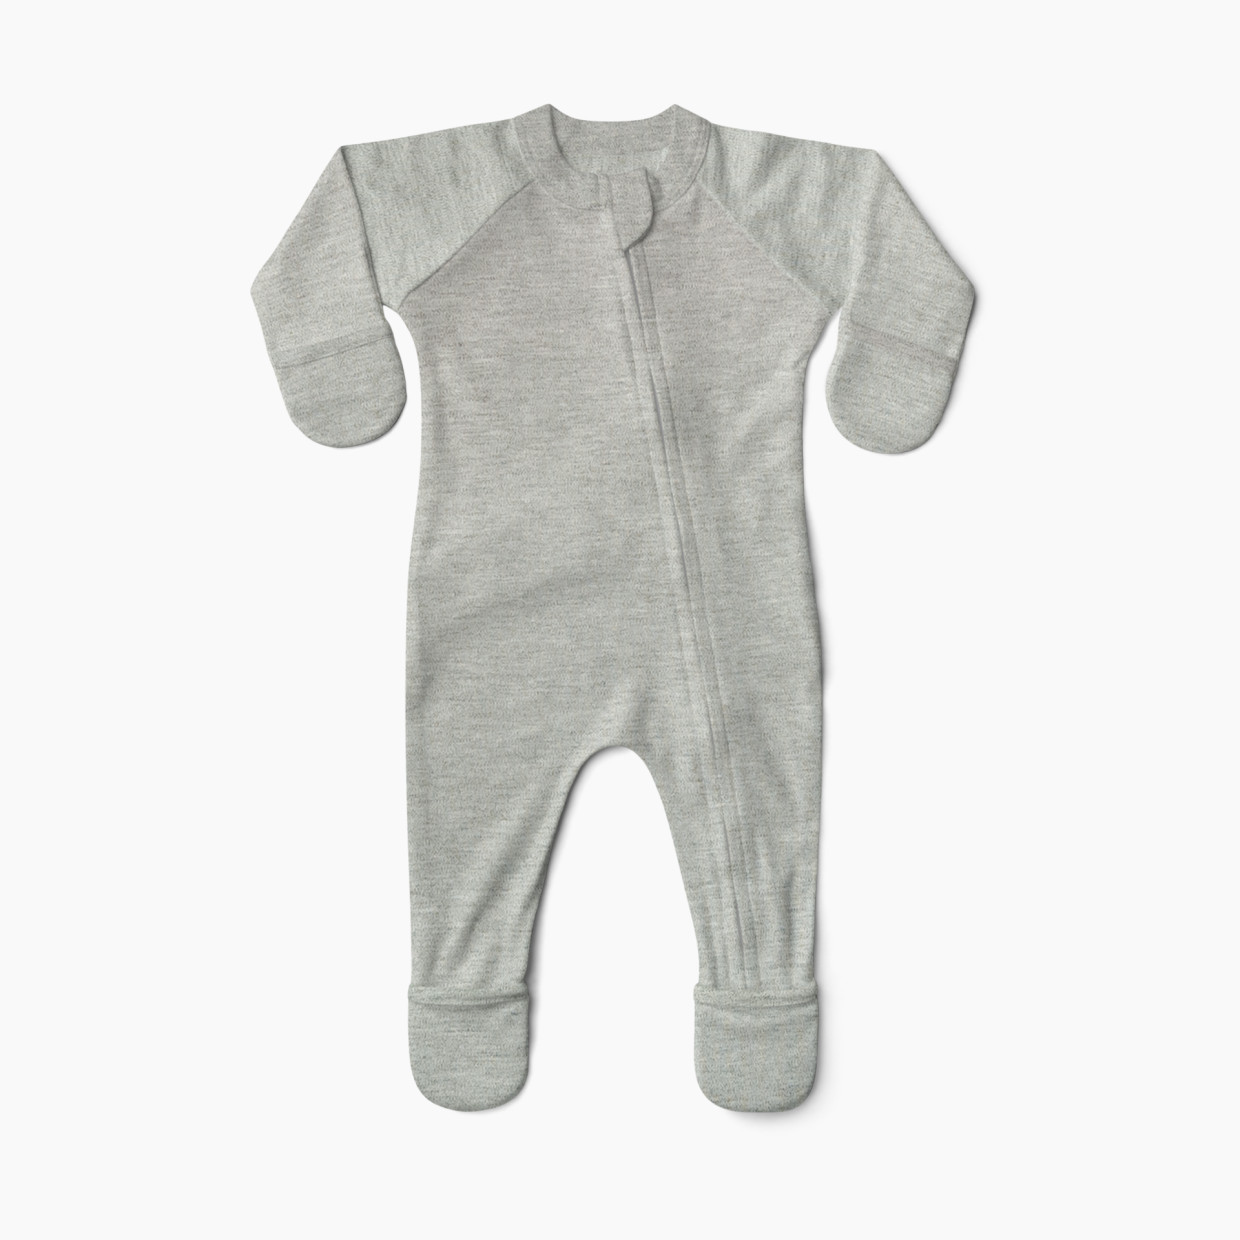 Goumi Kids x Babylist Grow With You Footie - Loose Fit - Pebble, 3-6 M.